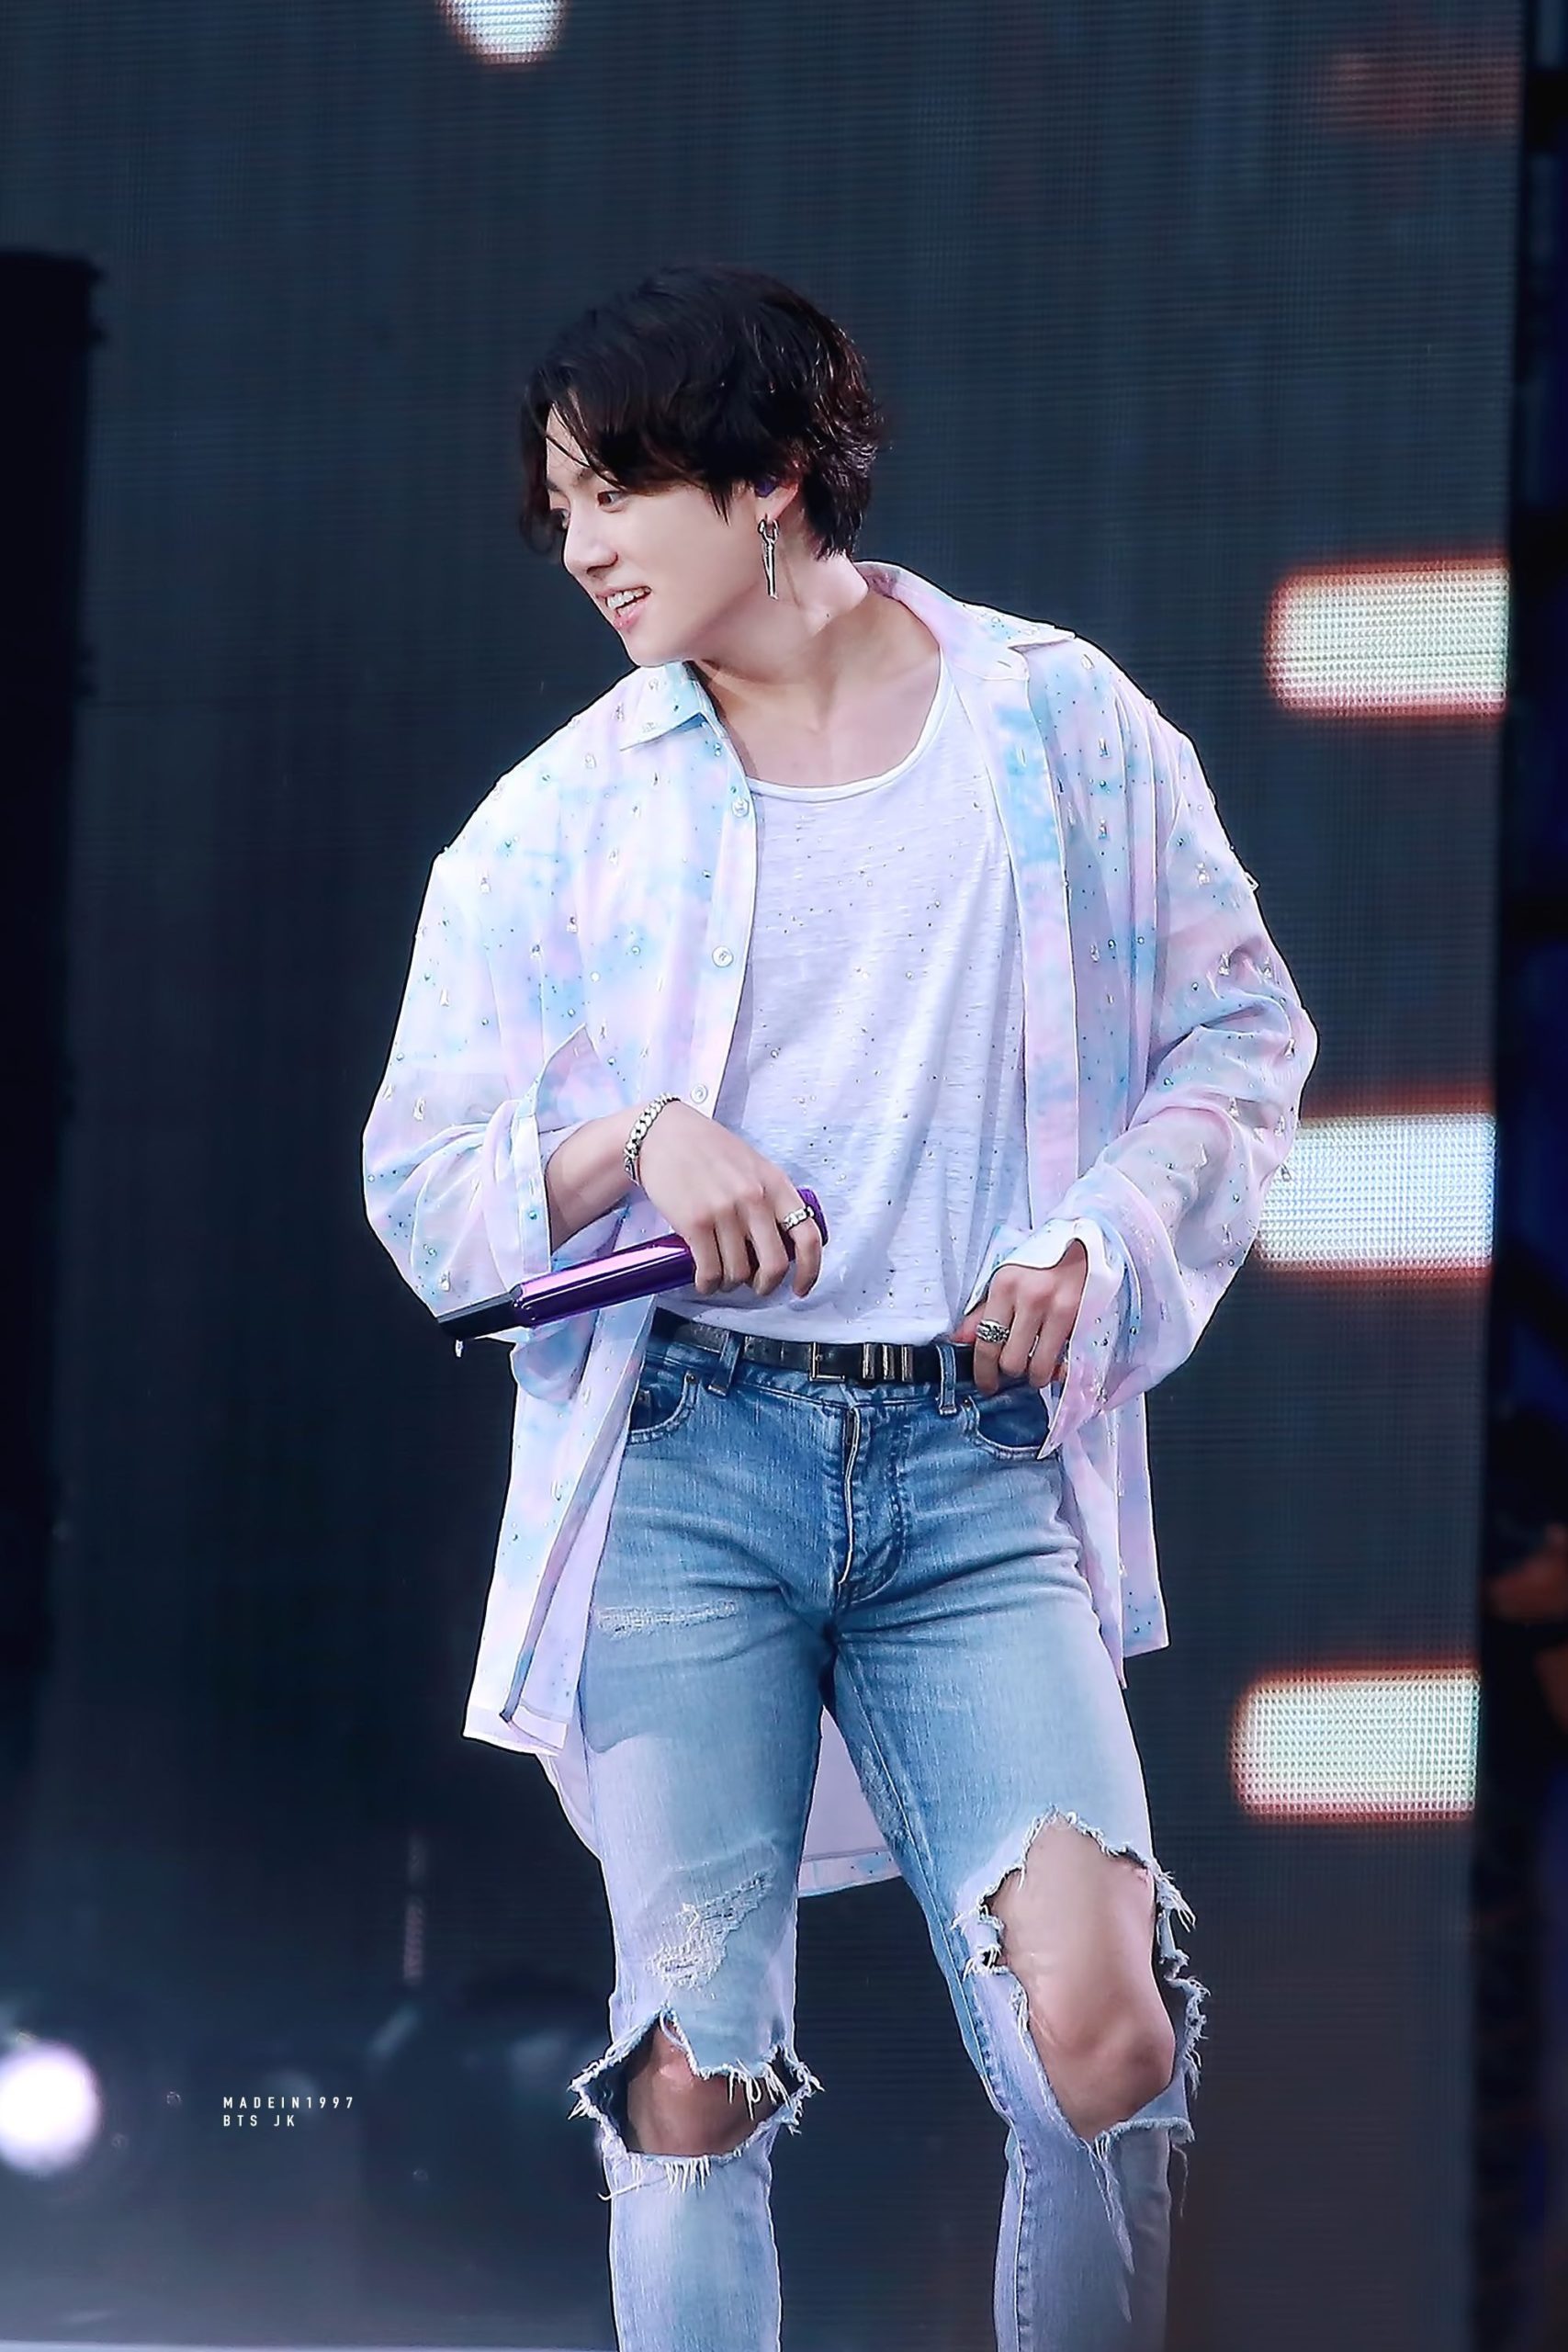 BTS’s Jungkook Makes You Insane With His Amazing Body | starbiz.net